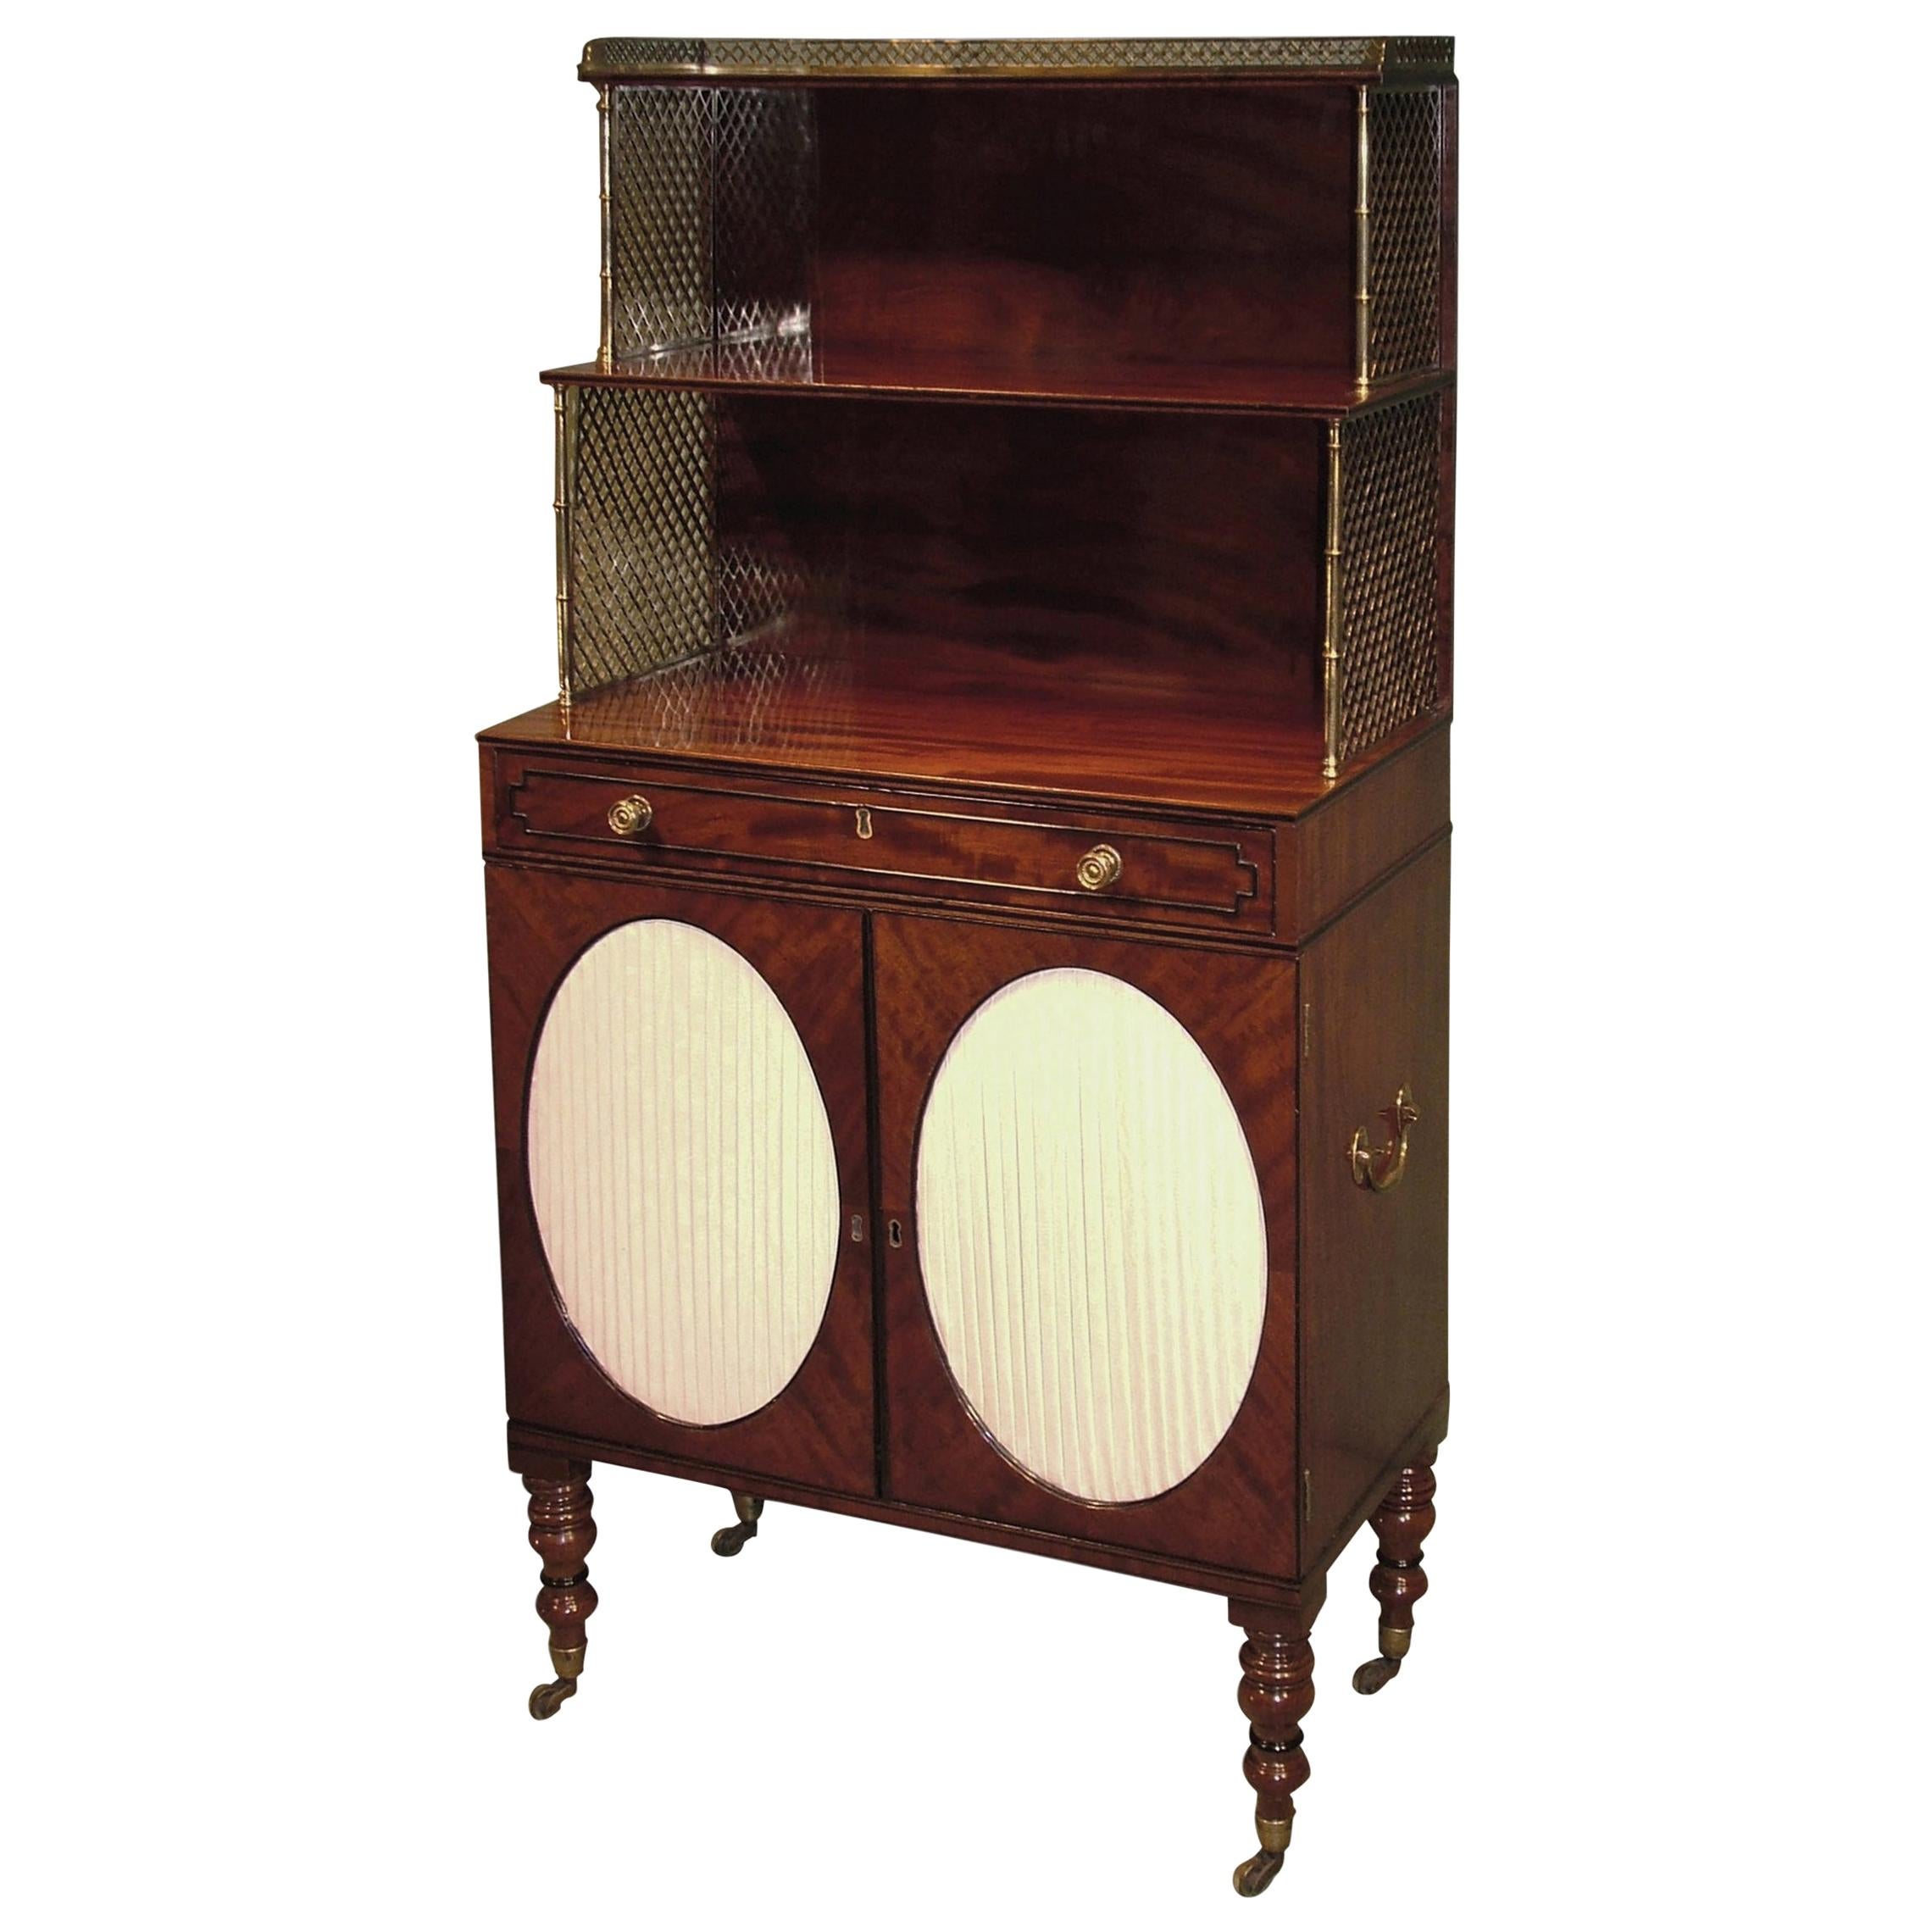 Early 19th Century Regency Period Figured Mahogany Chiffonier For Sale